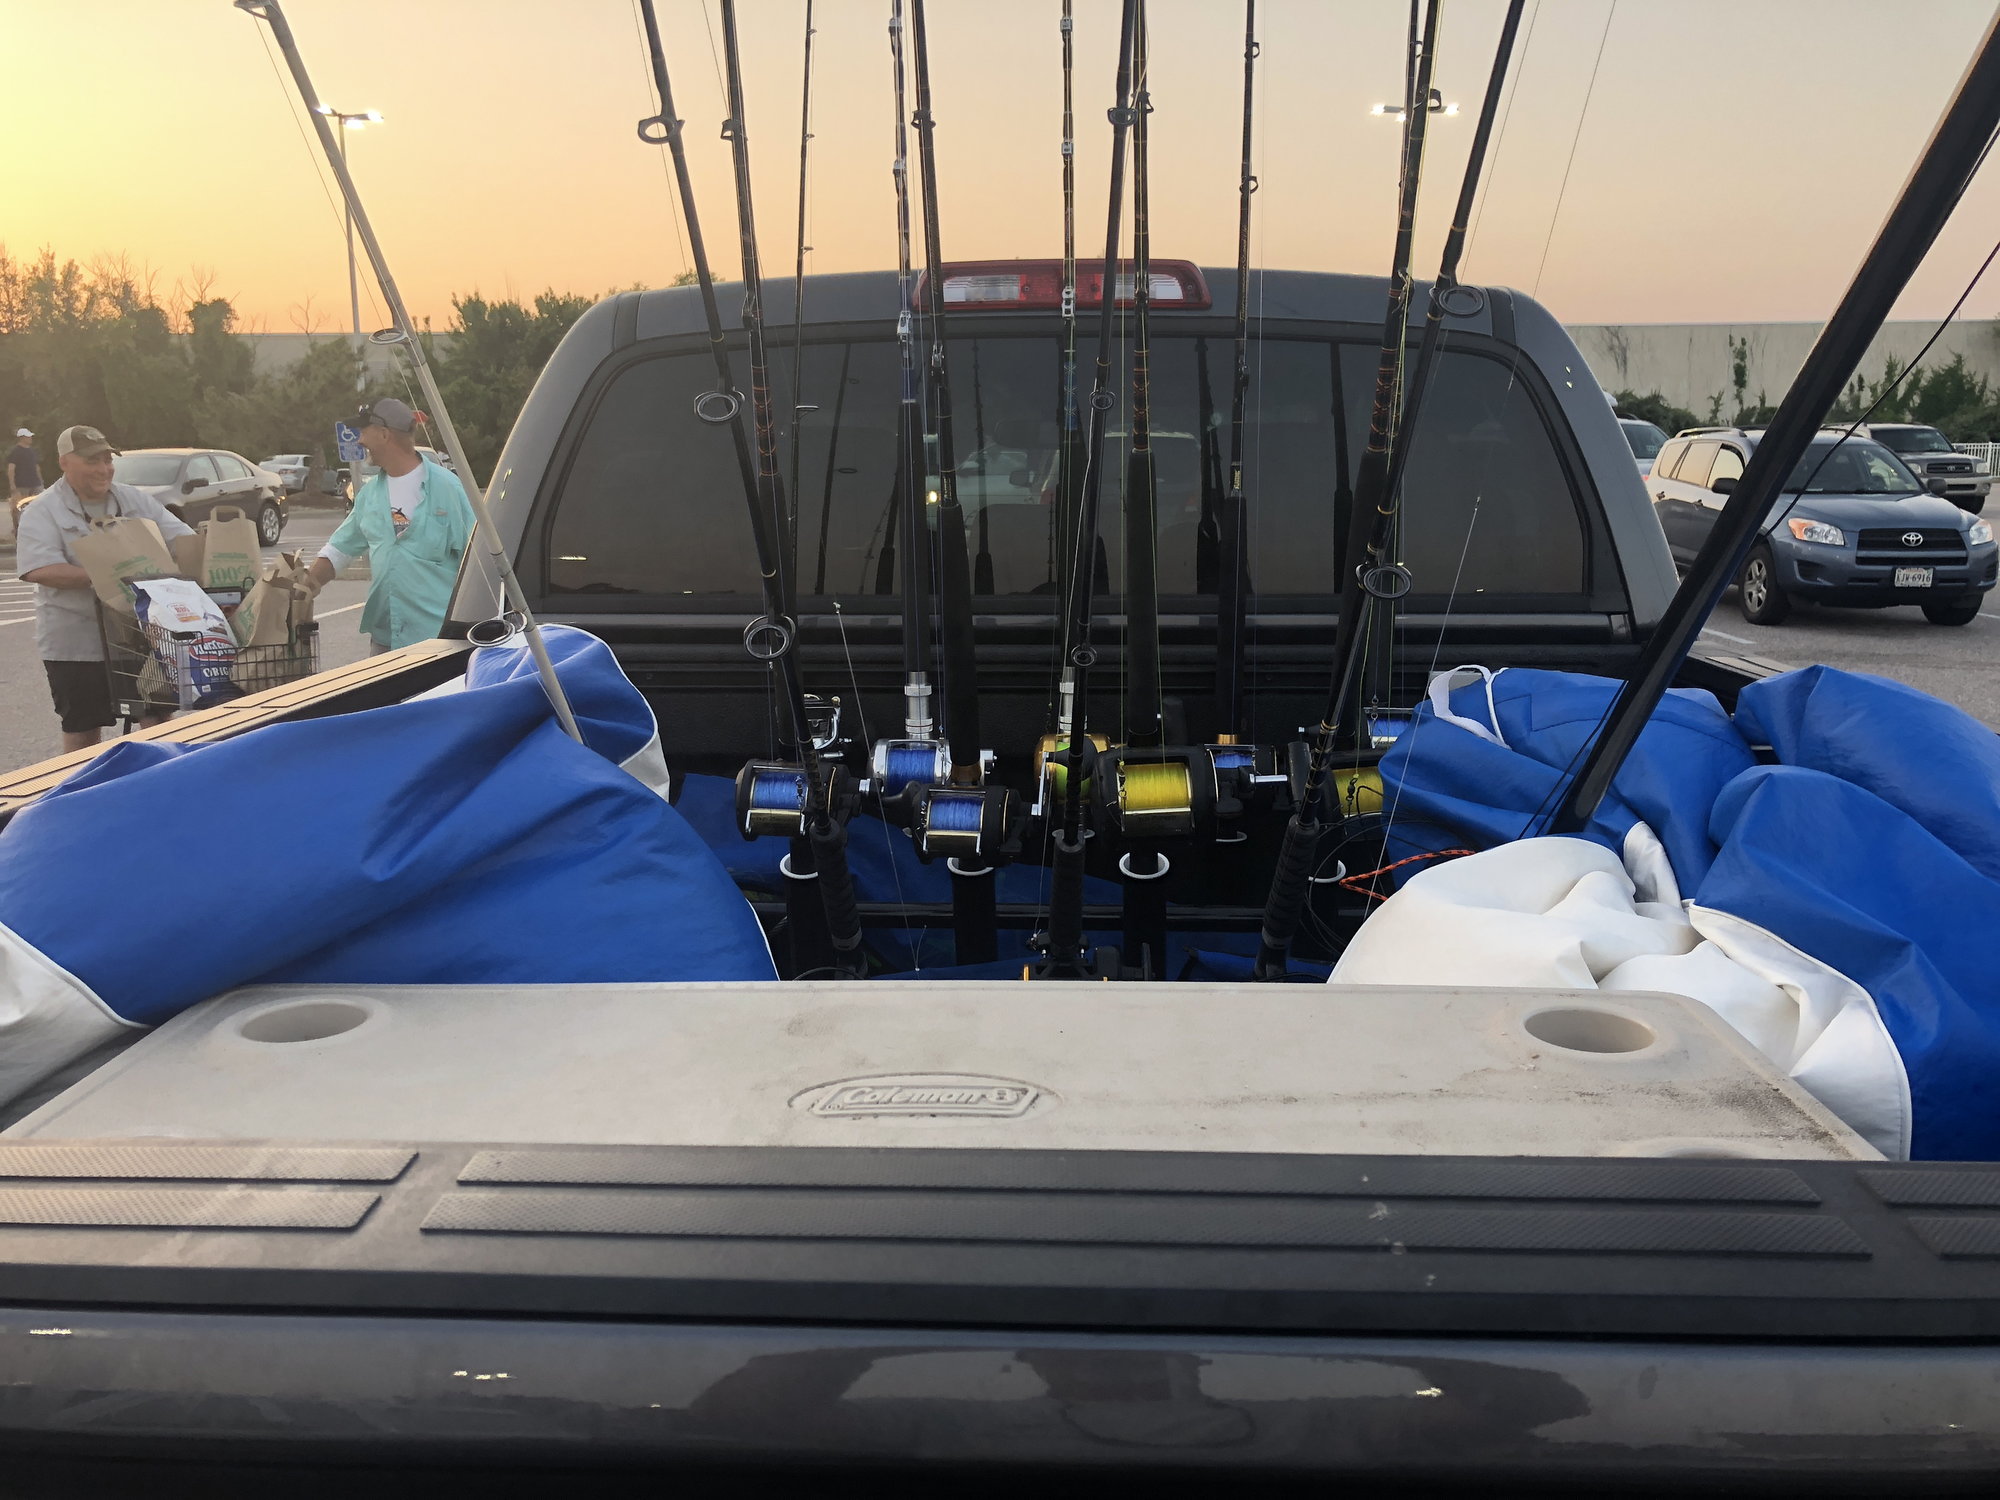 Rod/Reel storage during long distance road trips - The Hull Truth